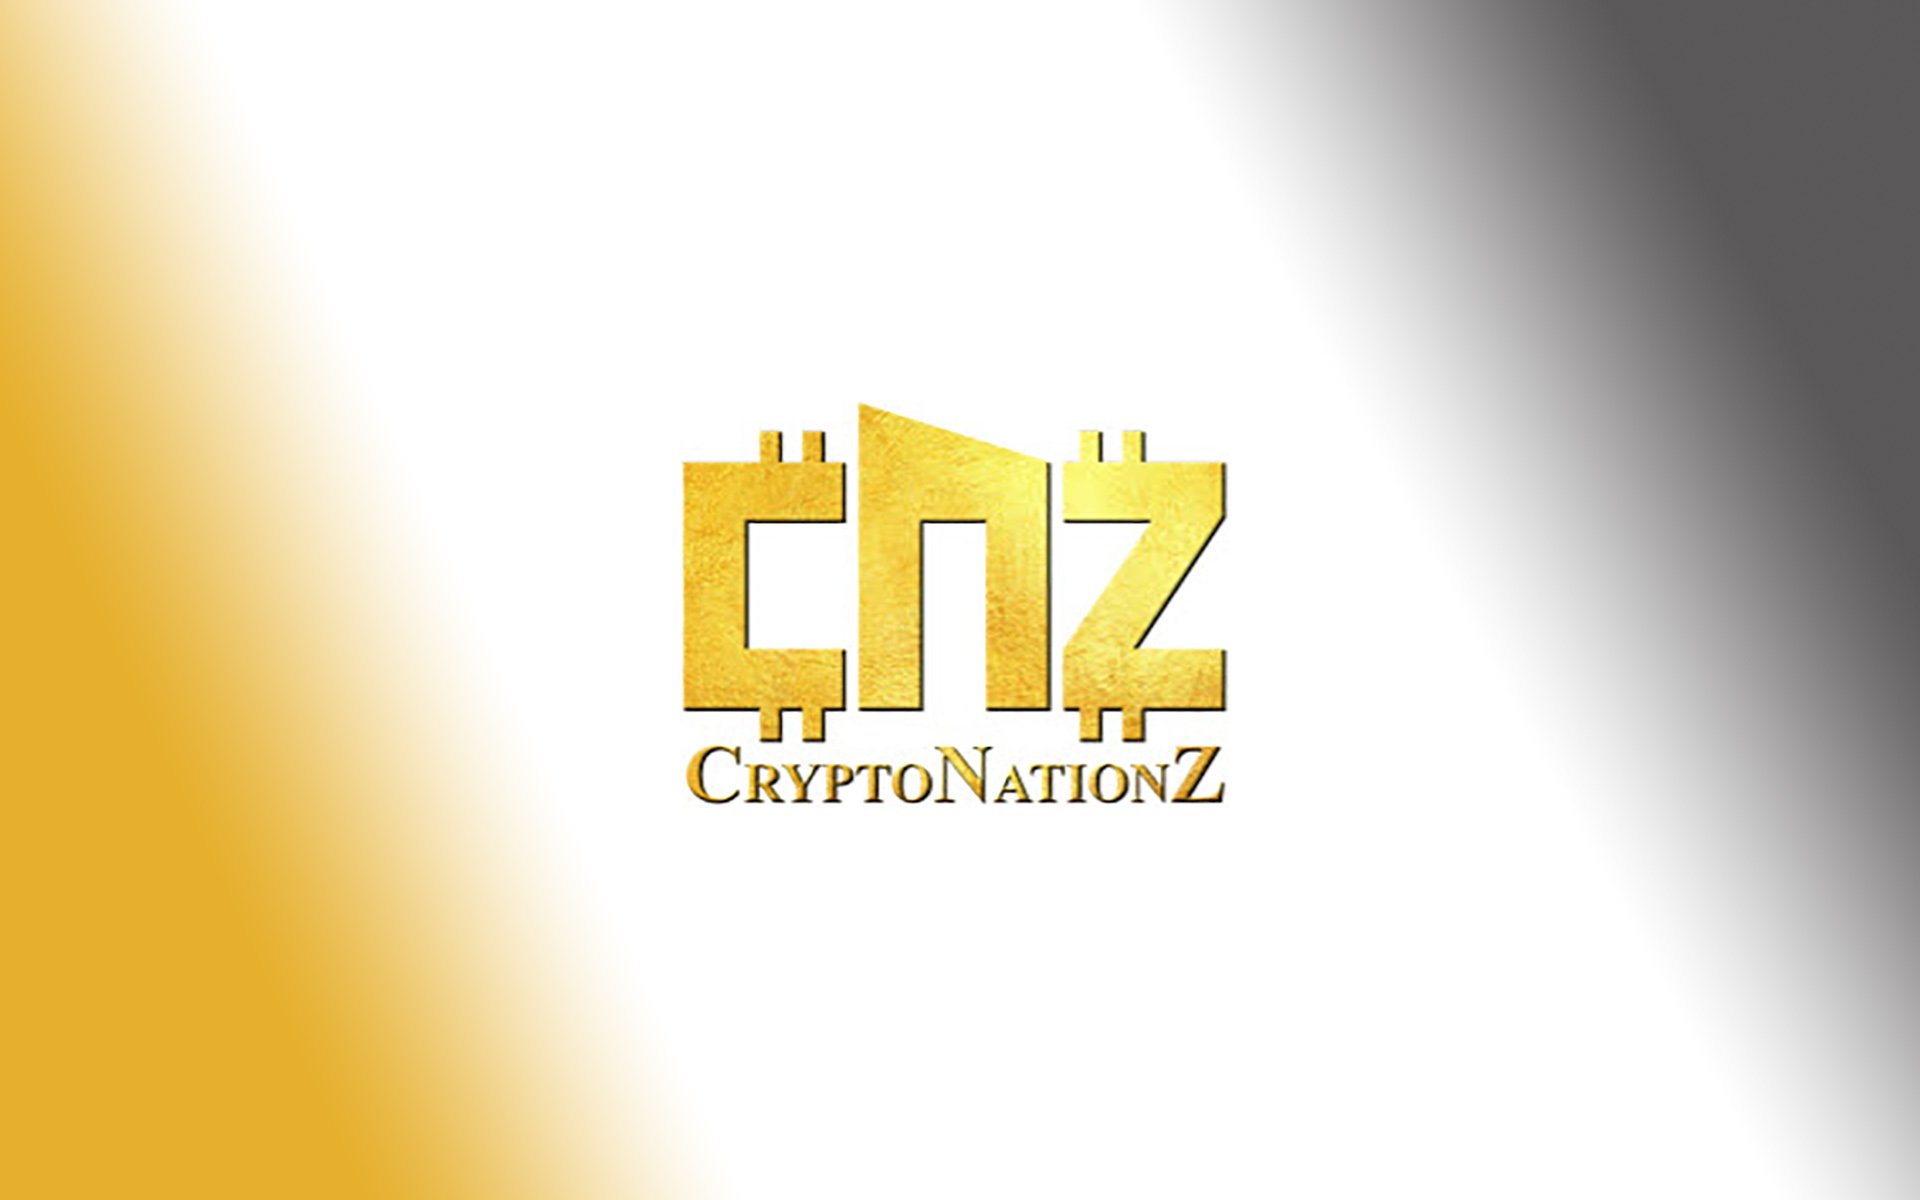 CryptoNationZ Readies for ICO Pre-Sale – Integrates Blockchain Technology with Real-Estate Projects Aimed at the Crypto Community